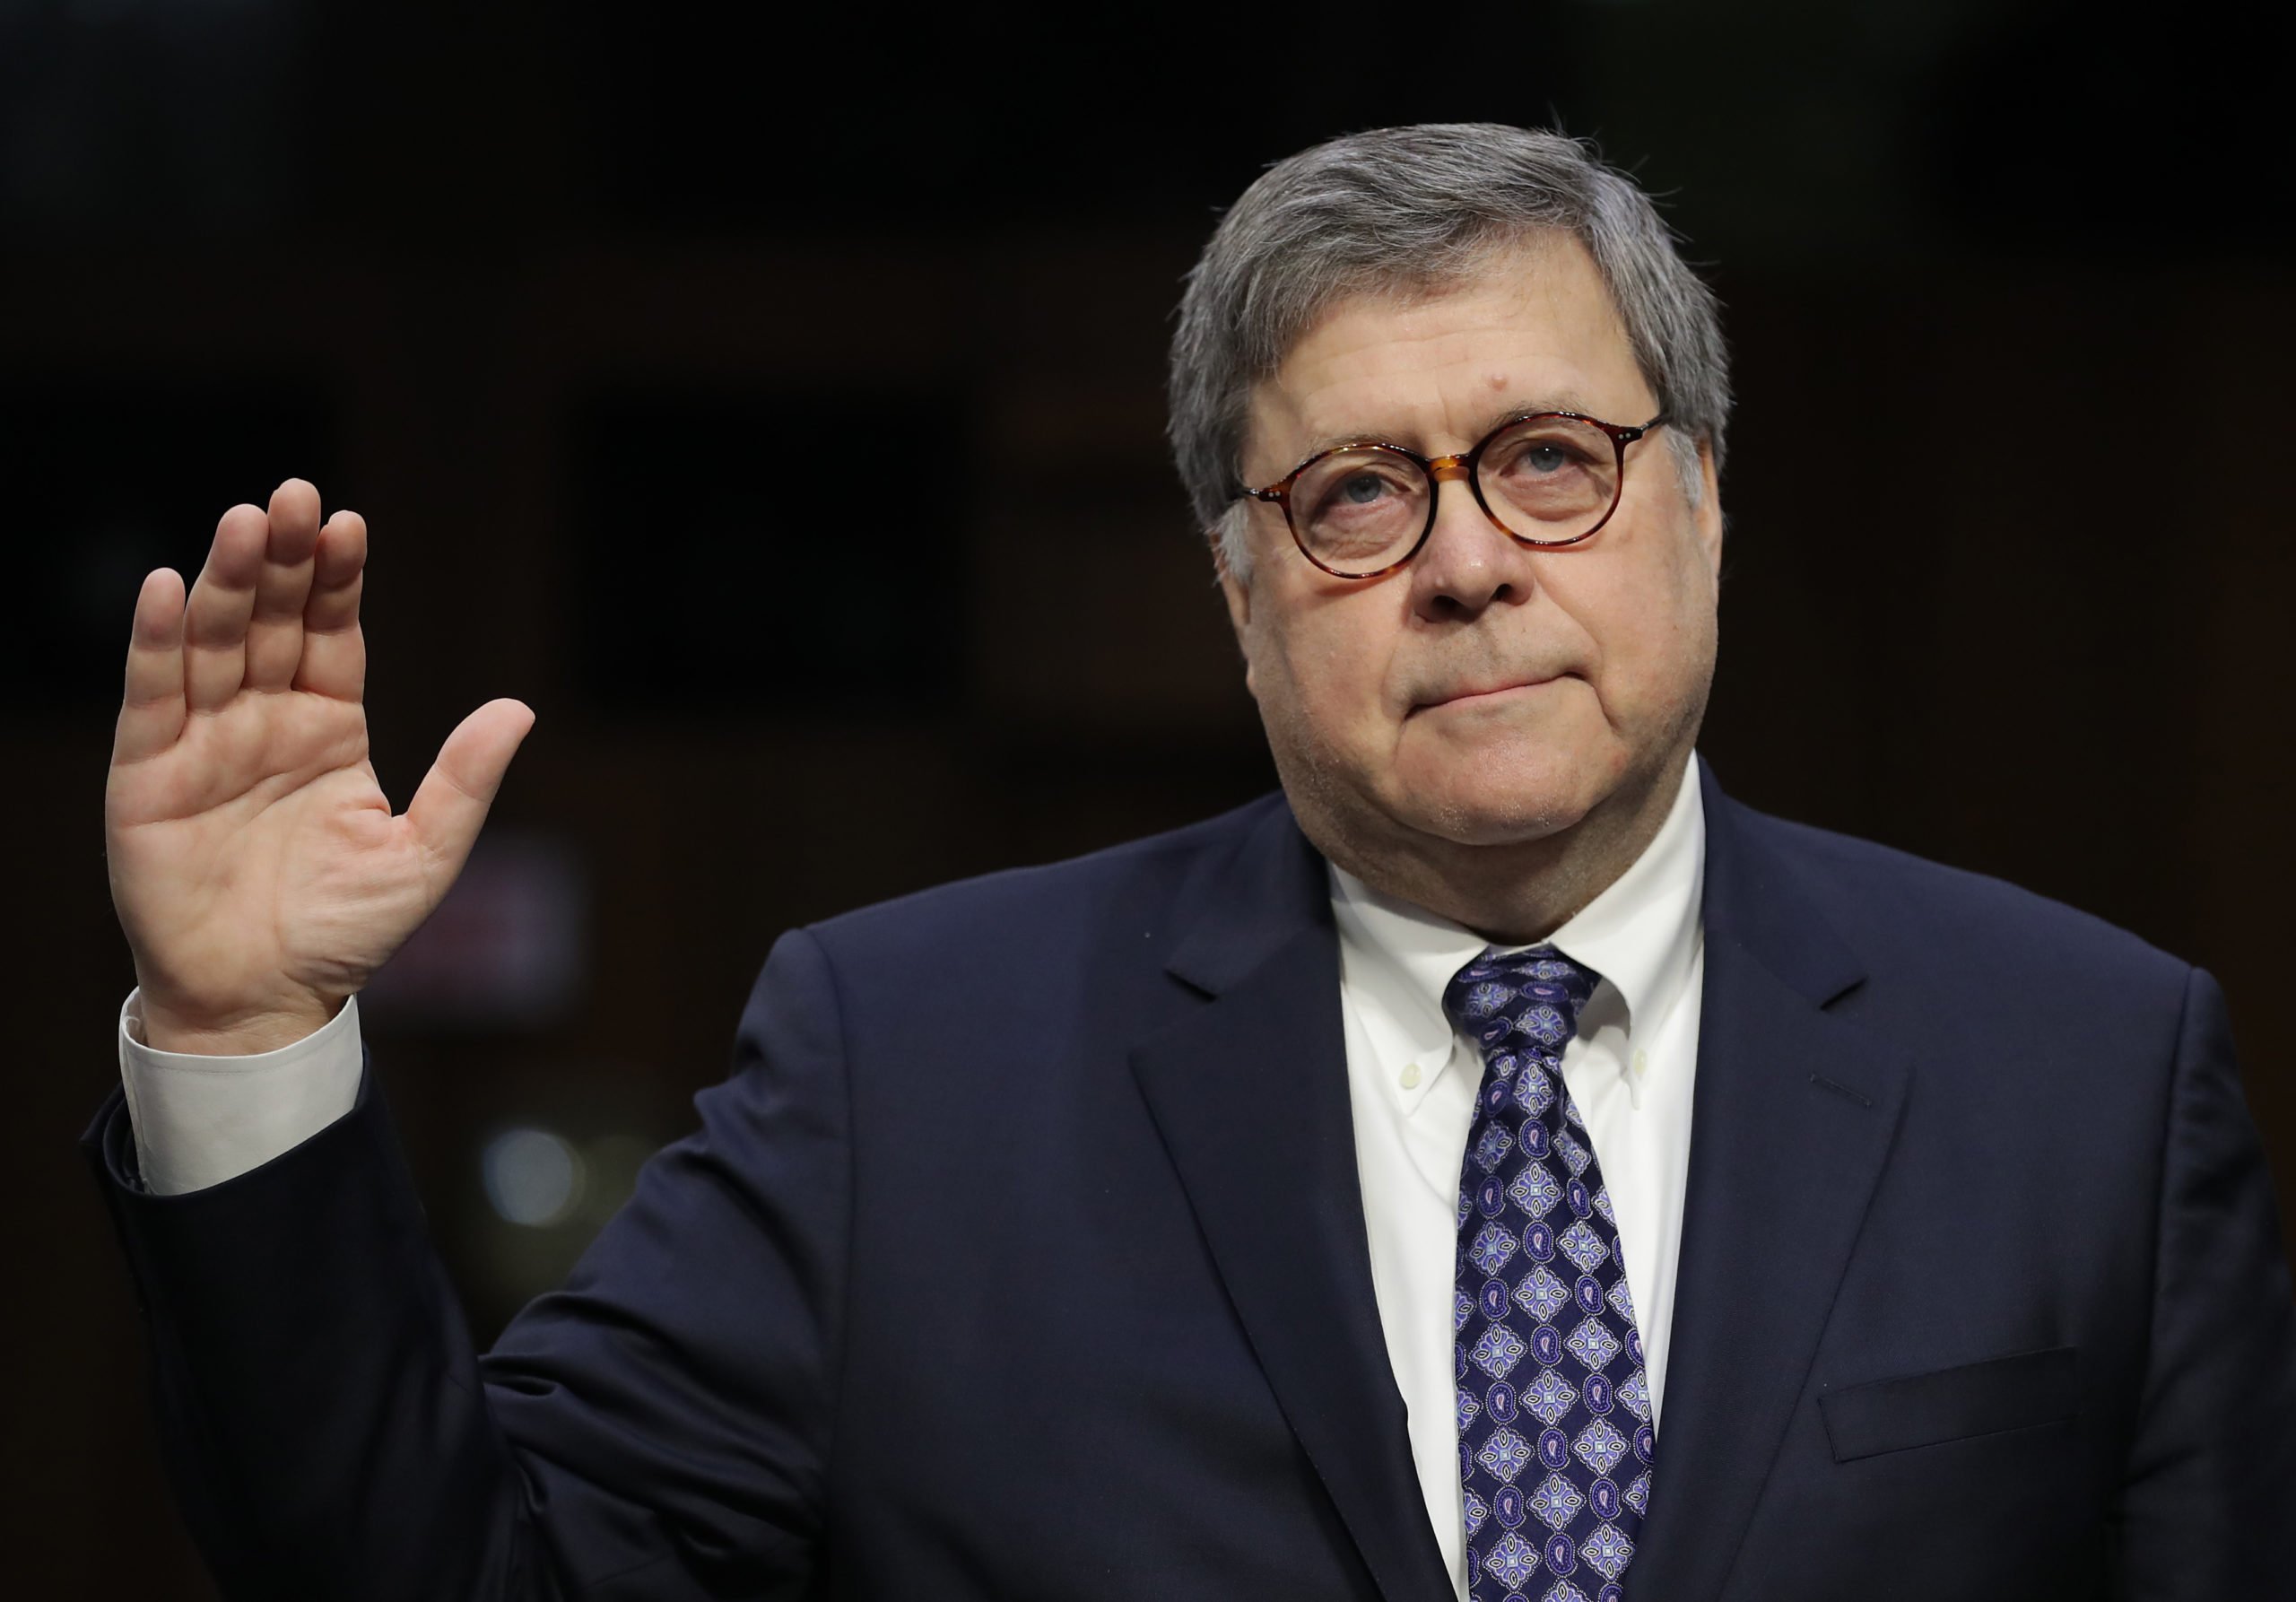 WASHINGTON, DC - JANUARY 15: U.S. Attorney General nominee William Barr (C) is sworn in prior to testifying at his confirmation hearing before the Senate Judiciary Committee January 15, 2019 in Washington, DC. Barr, who previously served as Attorney General under President George H. W. Bush, is expected to be confronted about his views on the investigation being conducted by special counsel Robert Mueller. (Photo by Chip Somodevilla/Getty Images)